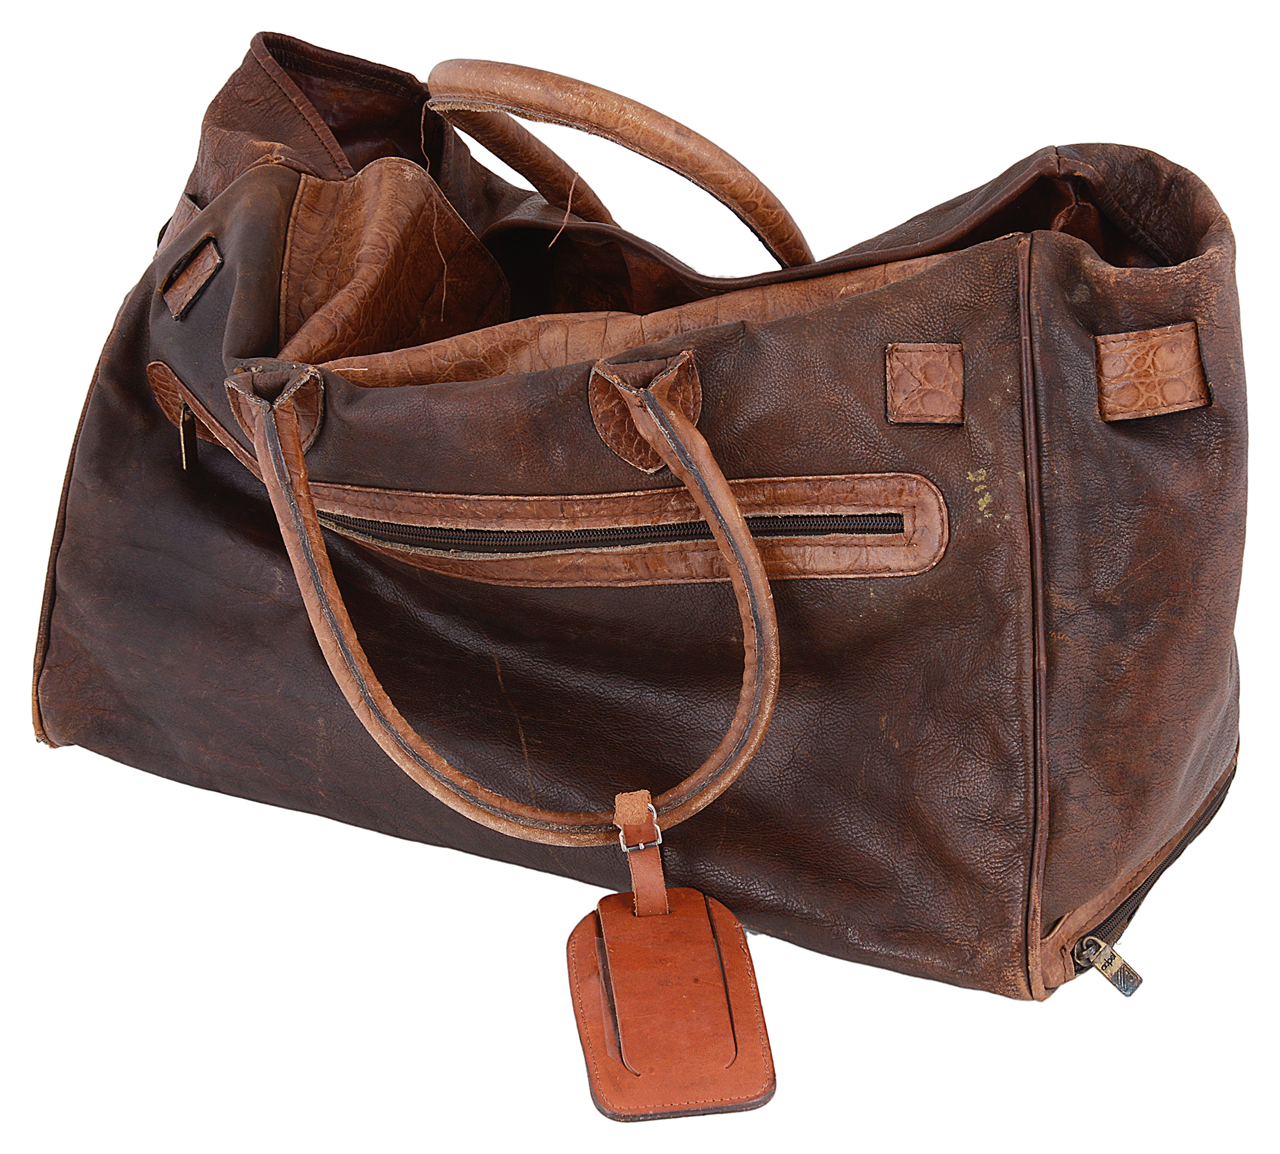 An Adpel brown leather travel bag